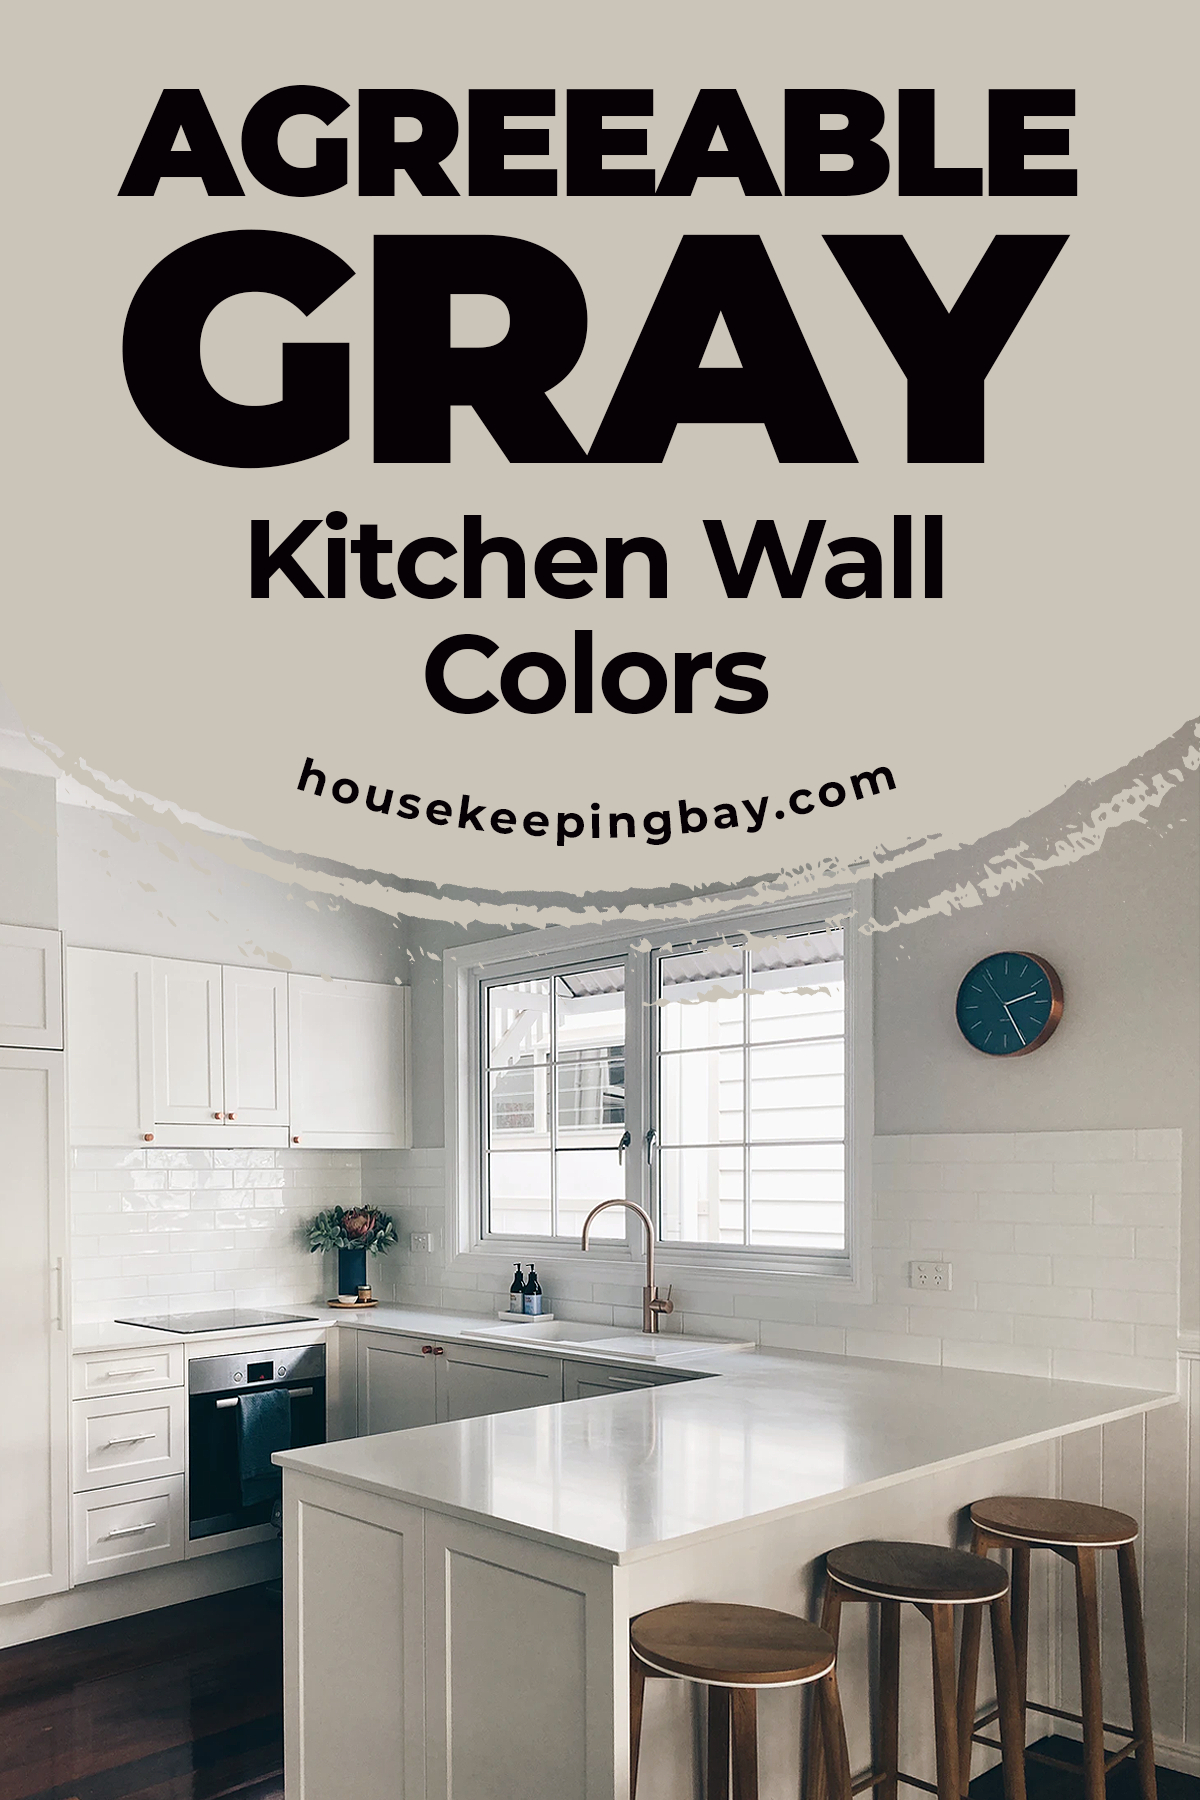 Agreeable gray kitchen wall colors